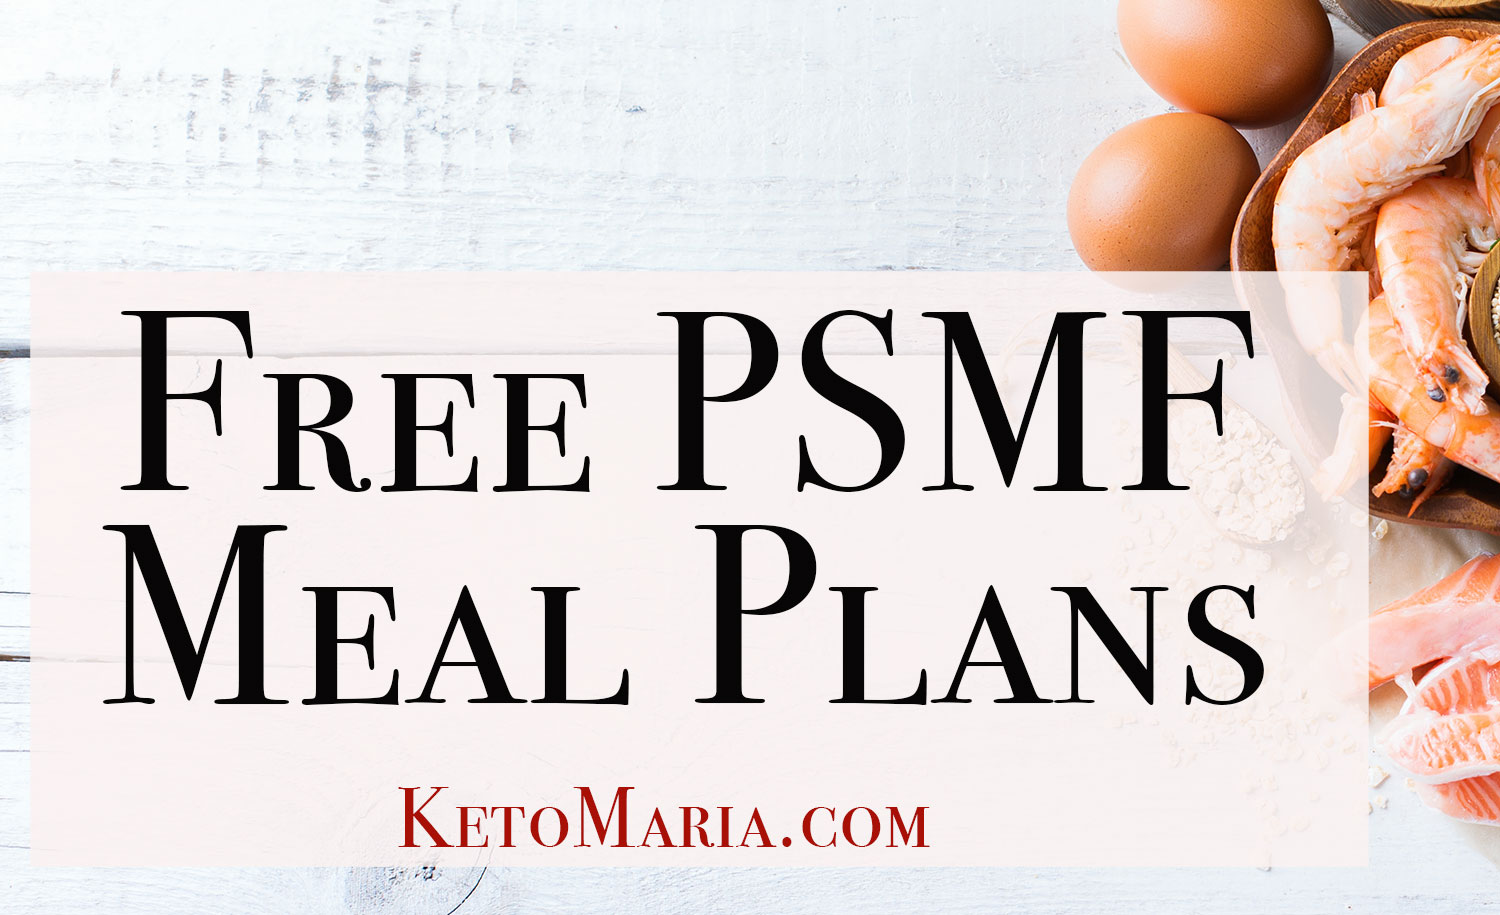 NEW FREE PSMF MEAL PLANS